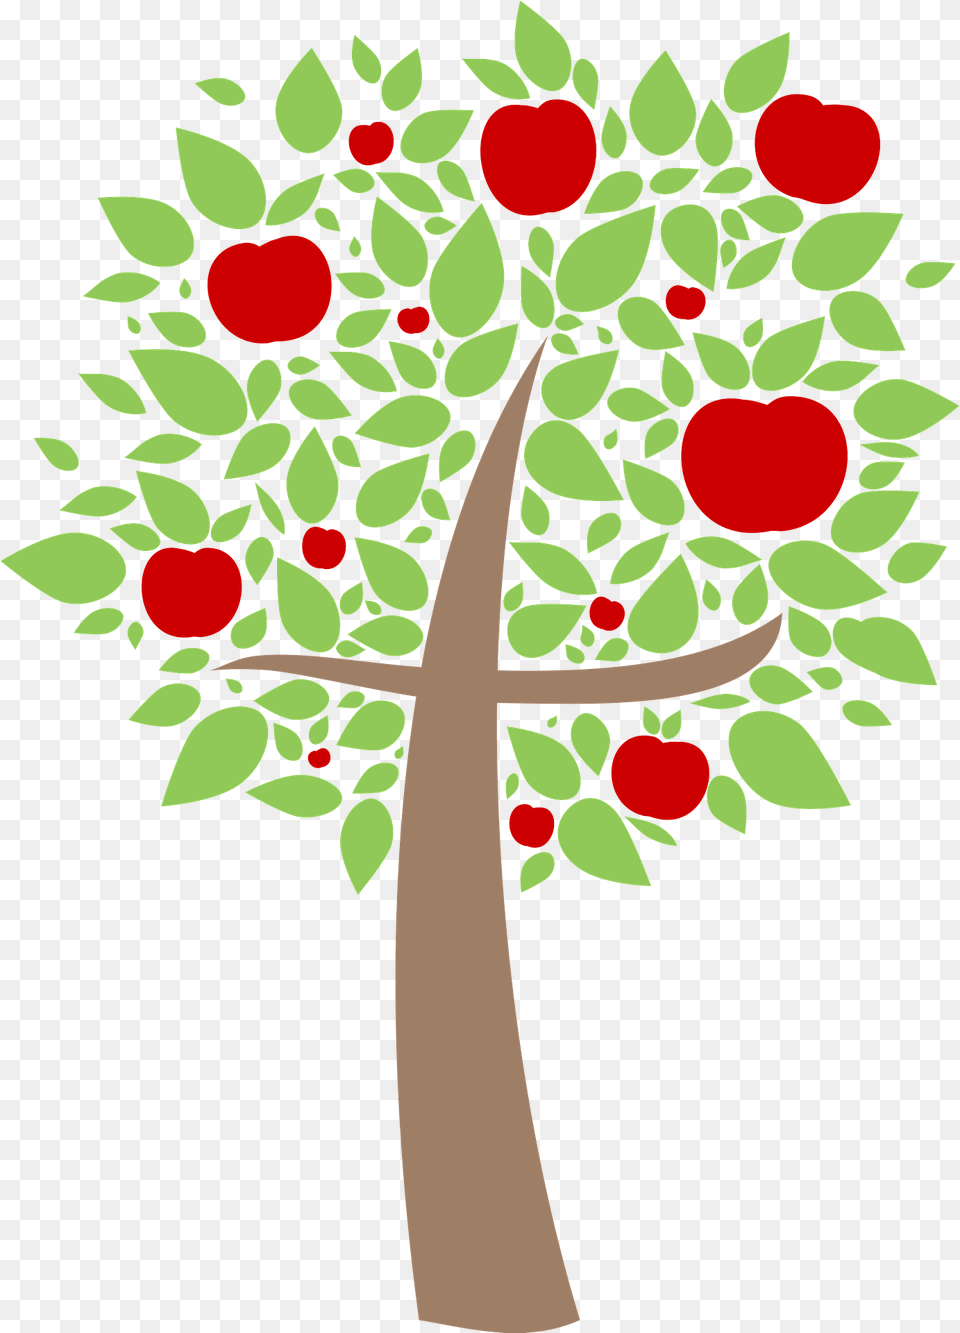 Apple Tree Cross Clipart Free Download Transparent Apple Tree Clipart Free, Leaf, Plant, Pattern, Art Png